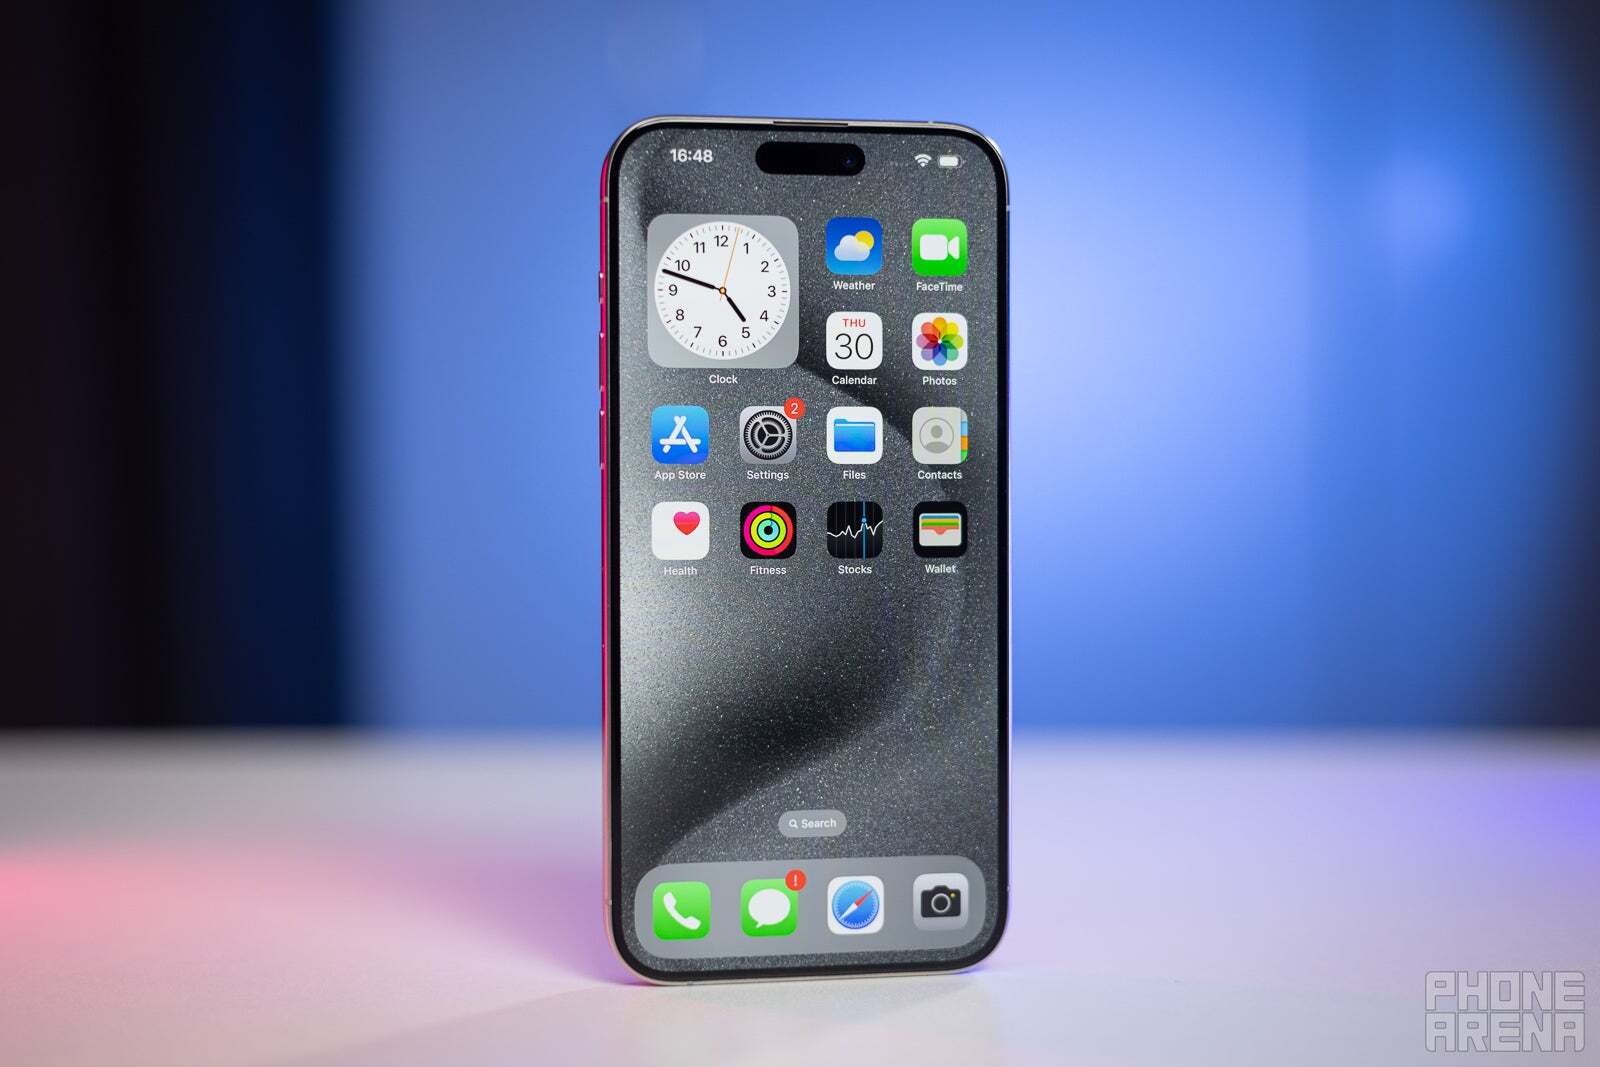 The iPhone 15 series, including the iPhone 15 Pro Max (pictured here) had a price cut in China earlier this year - iPhone shipments in China rose sharply last month to continue March's rebound